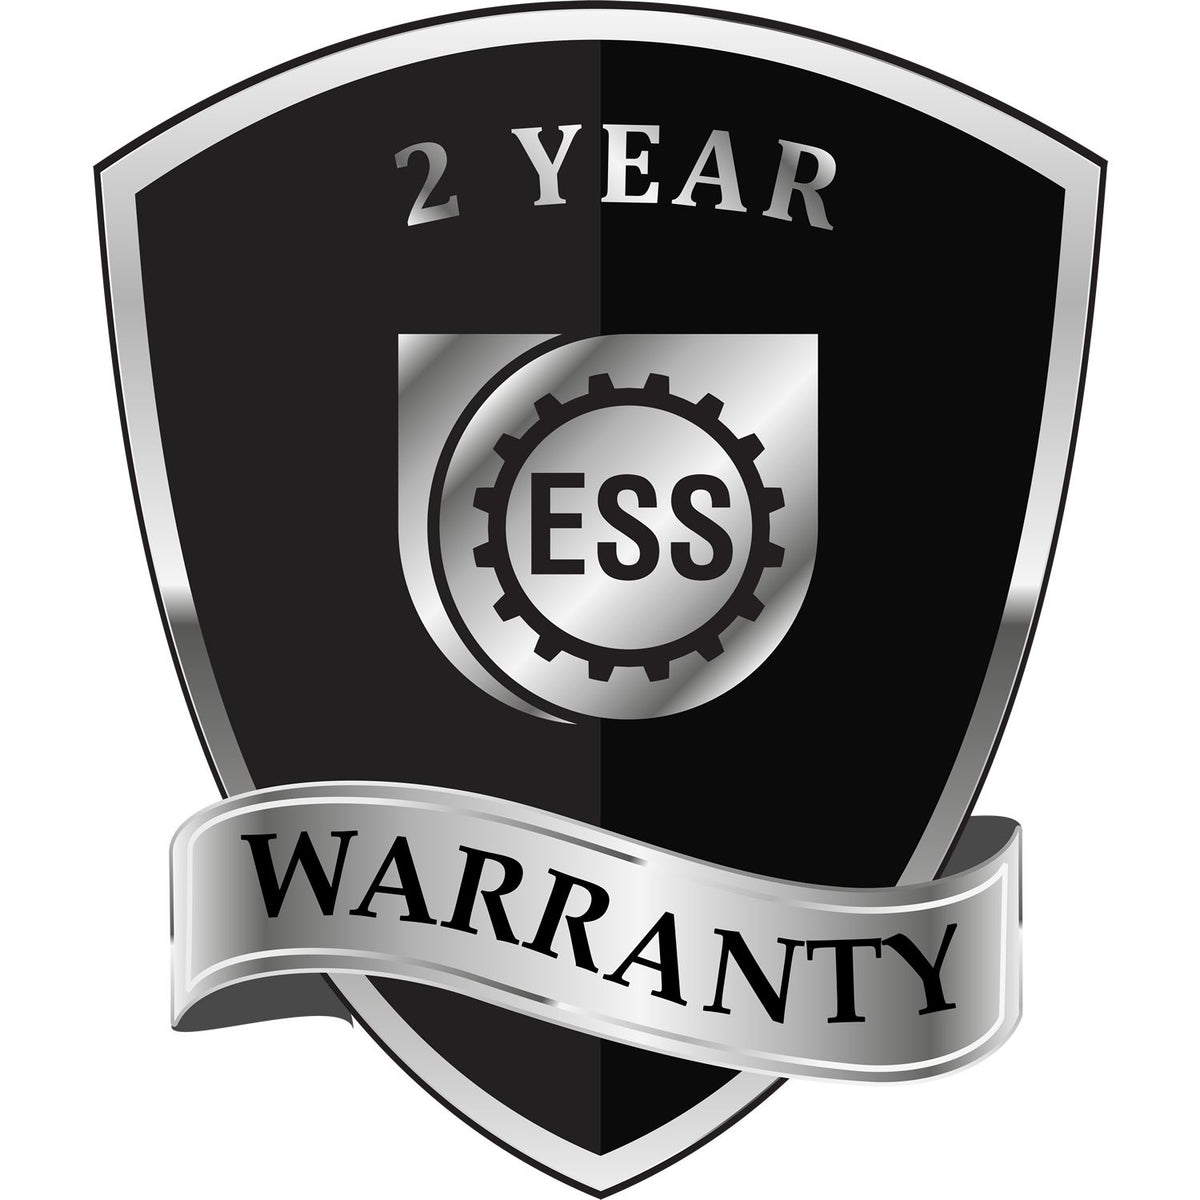 A black and silver badge or emblem showing warranty information for the Gift Virginia Geologist Seal